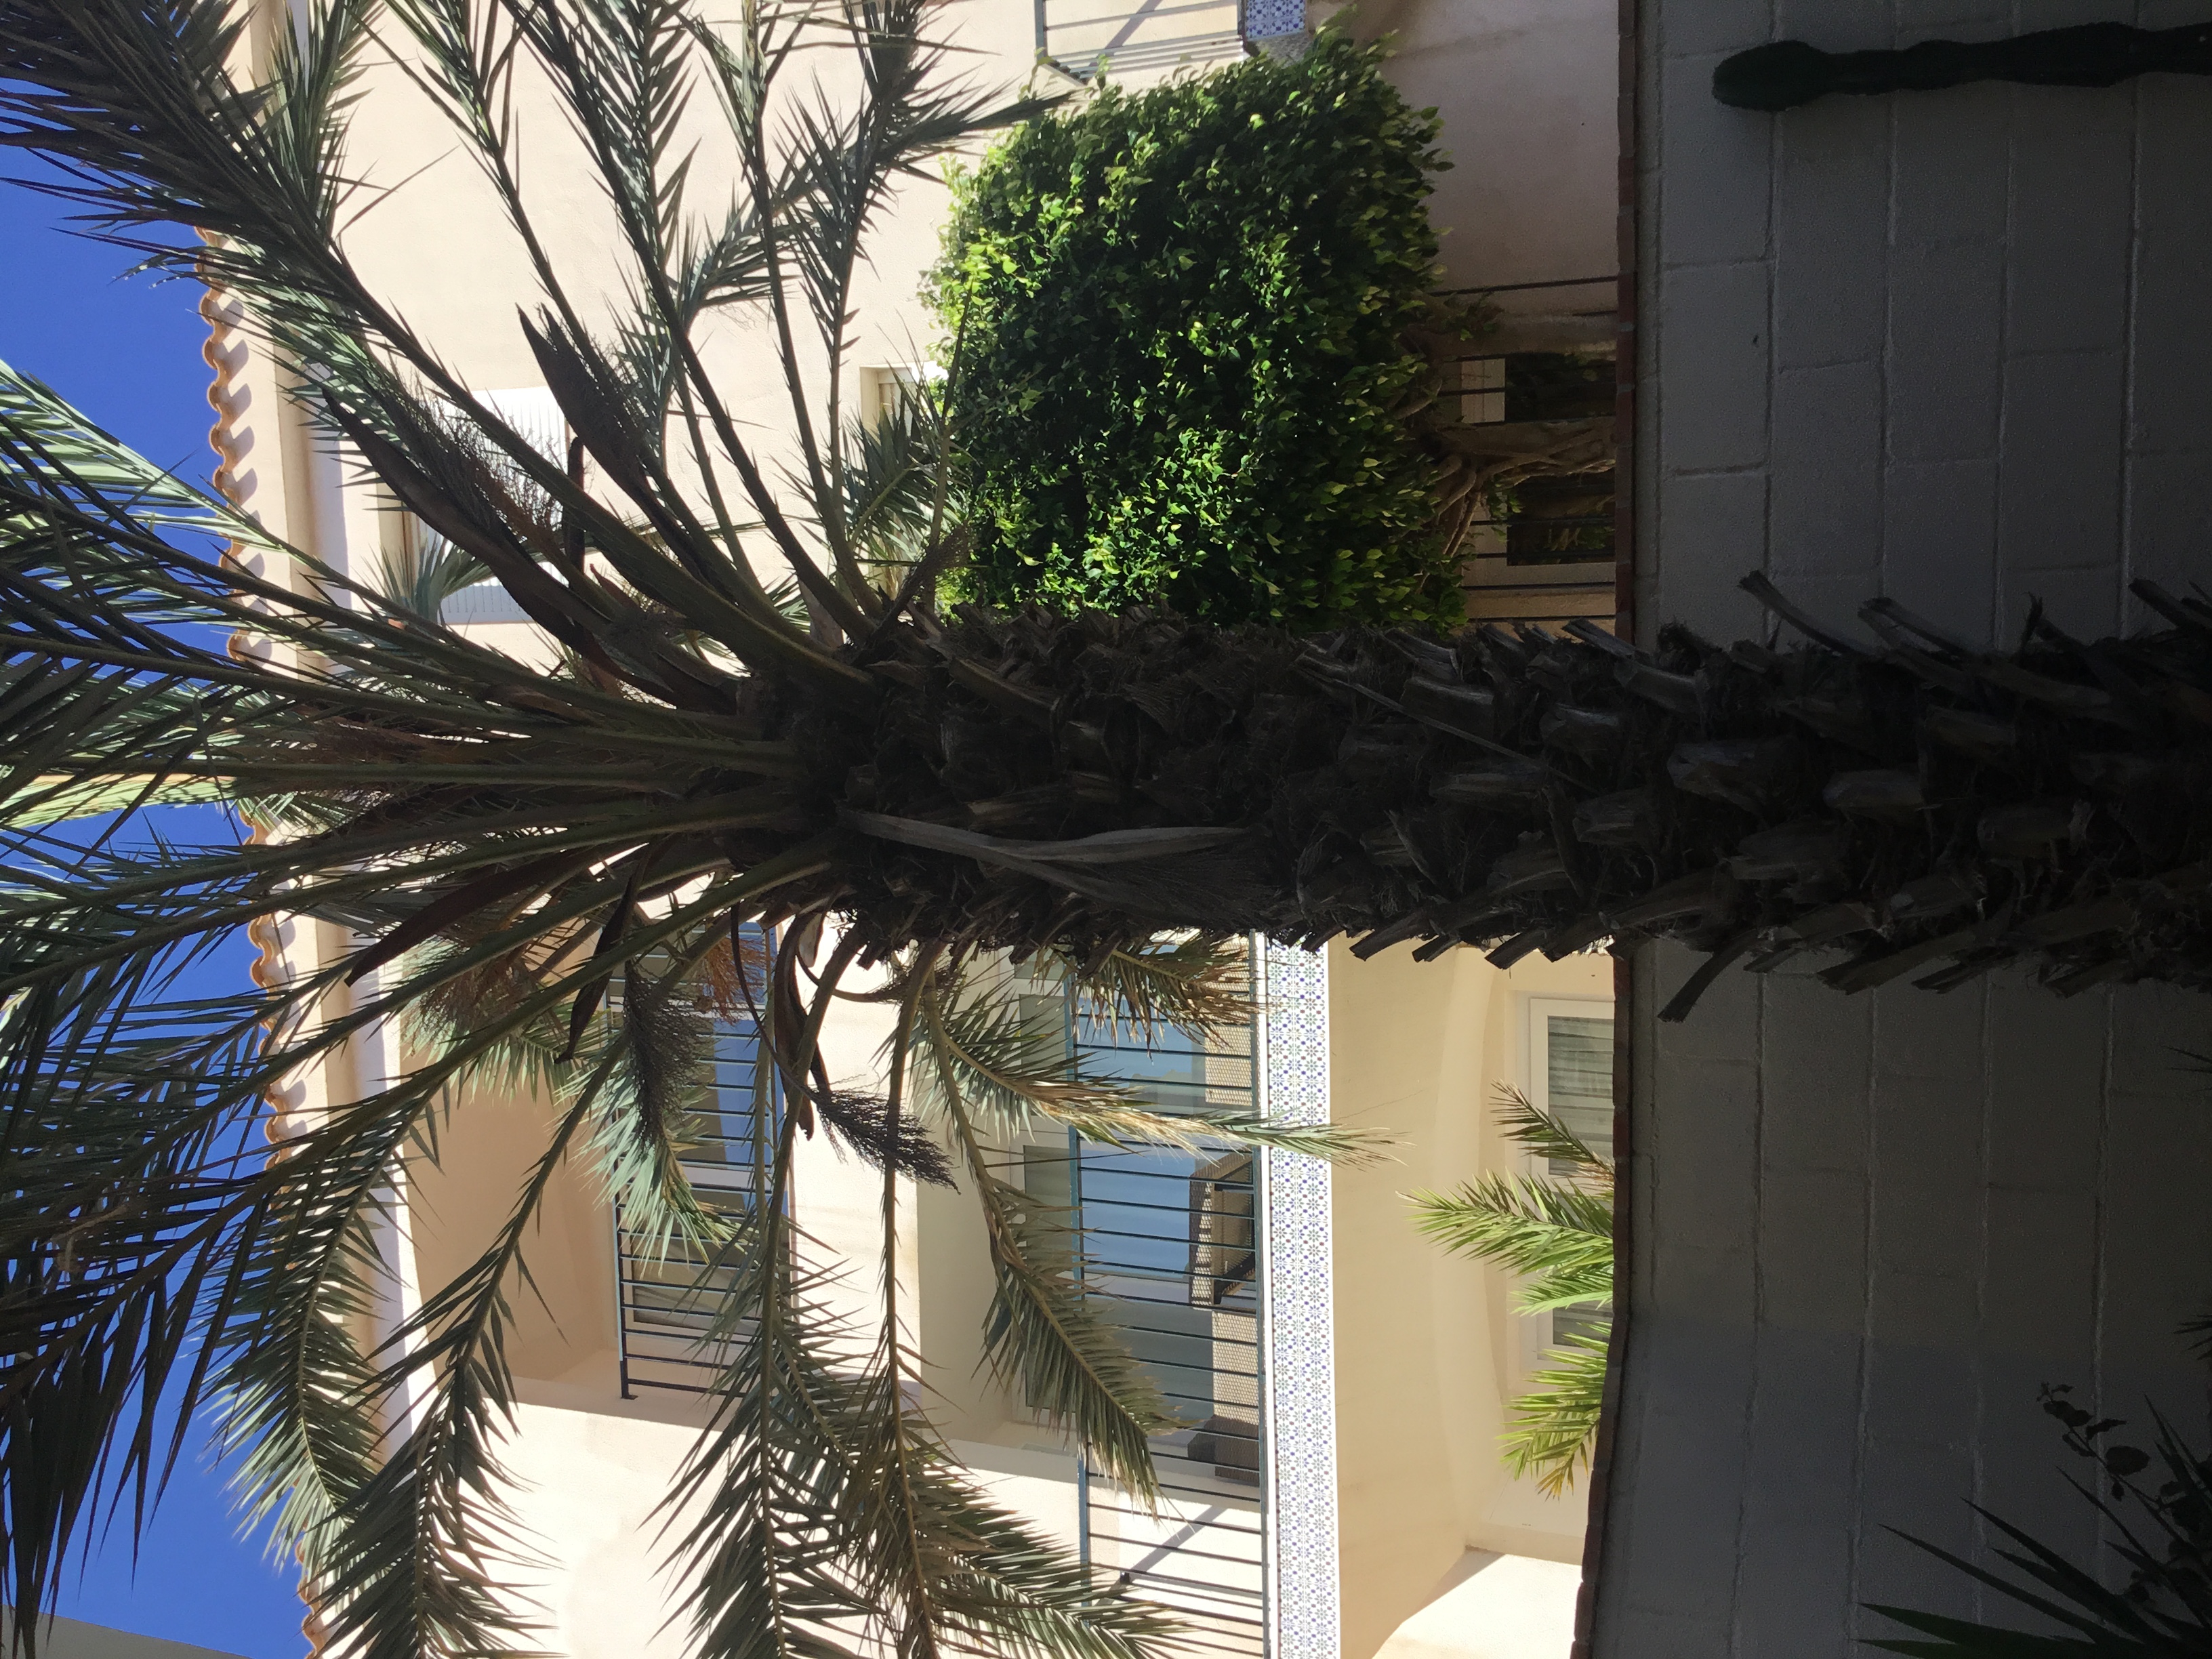 Can anyone recommend: I am looking for someone to prun a palm tree.